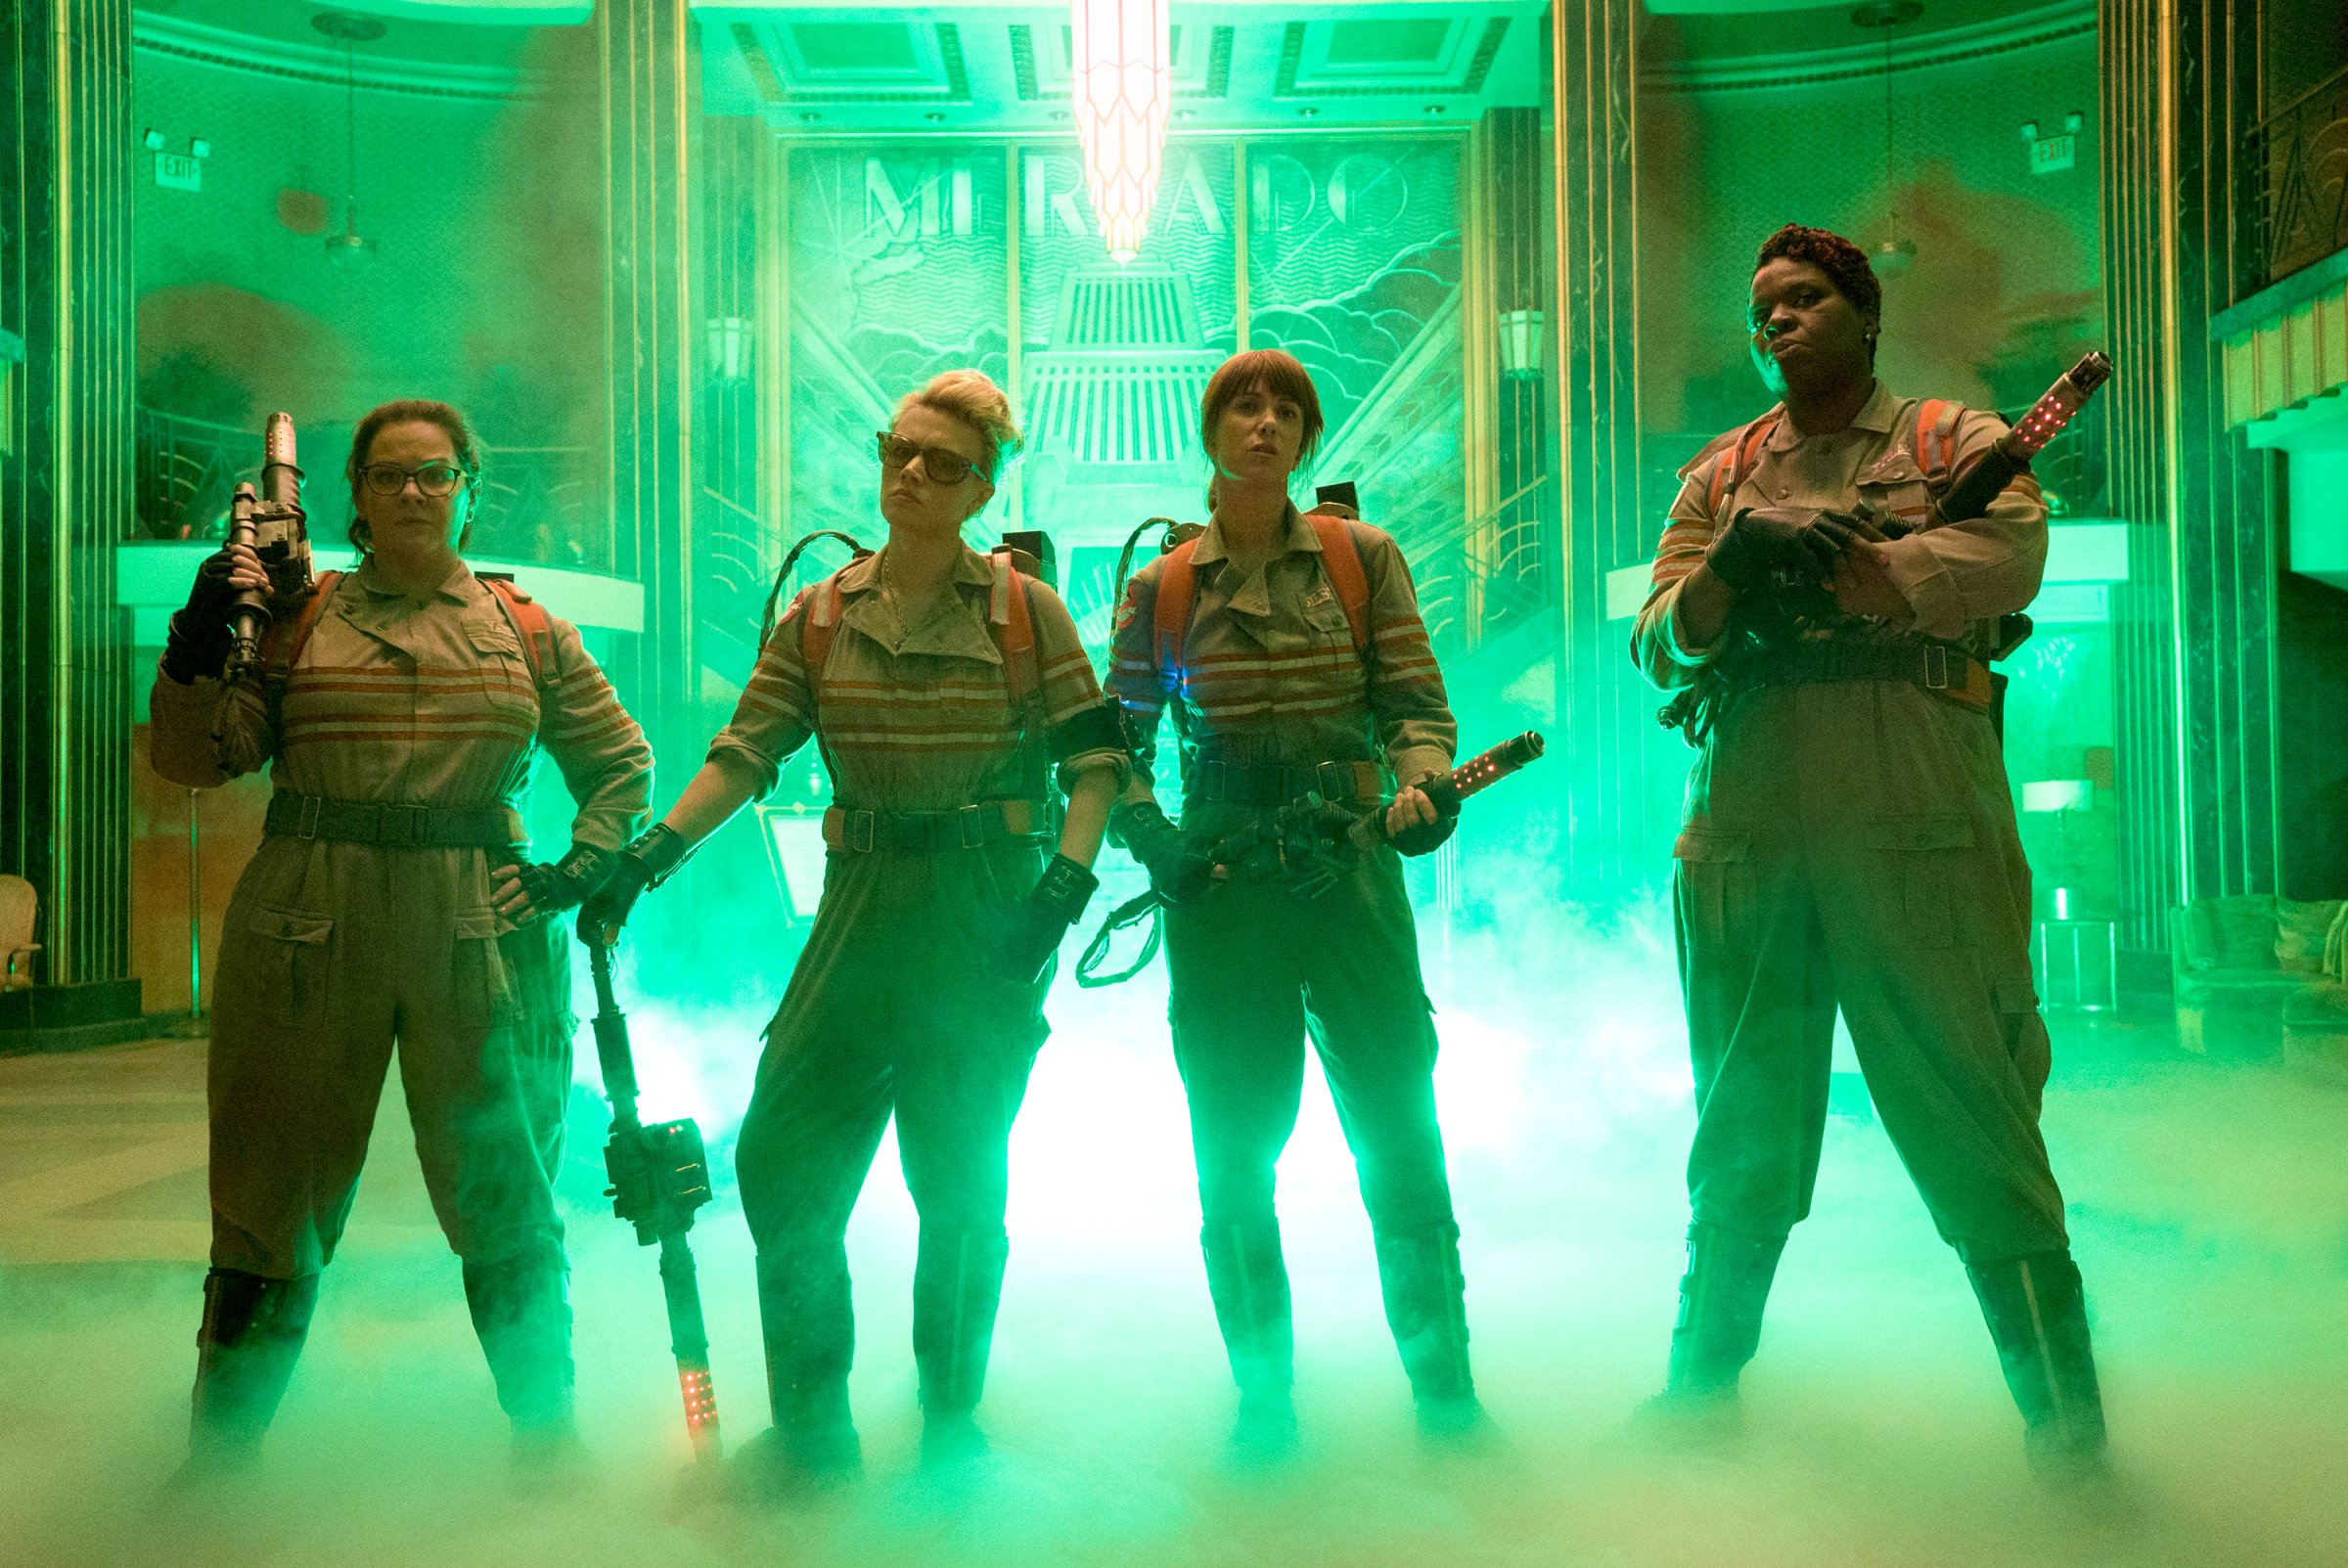 Melissa McCarthy as Abby, Kate McKinnon as Holtzmann, Kristen Wiig as Erin and Leslie Jones as Patty in Columbia Pictures' Ghostbusters.